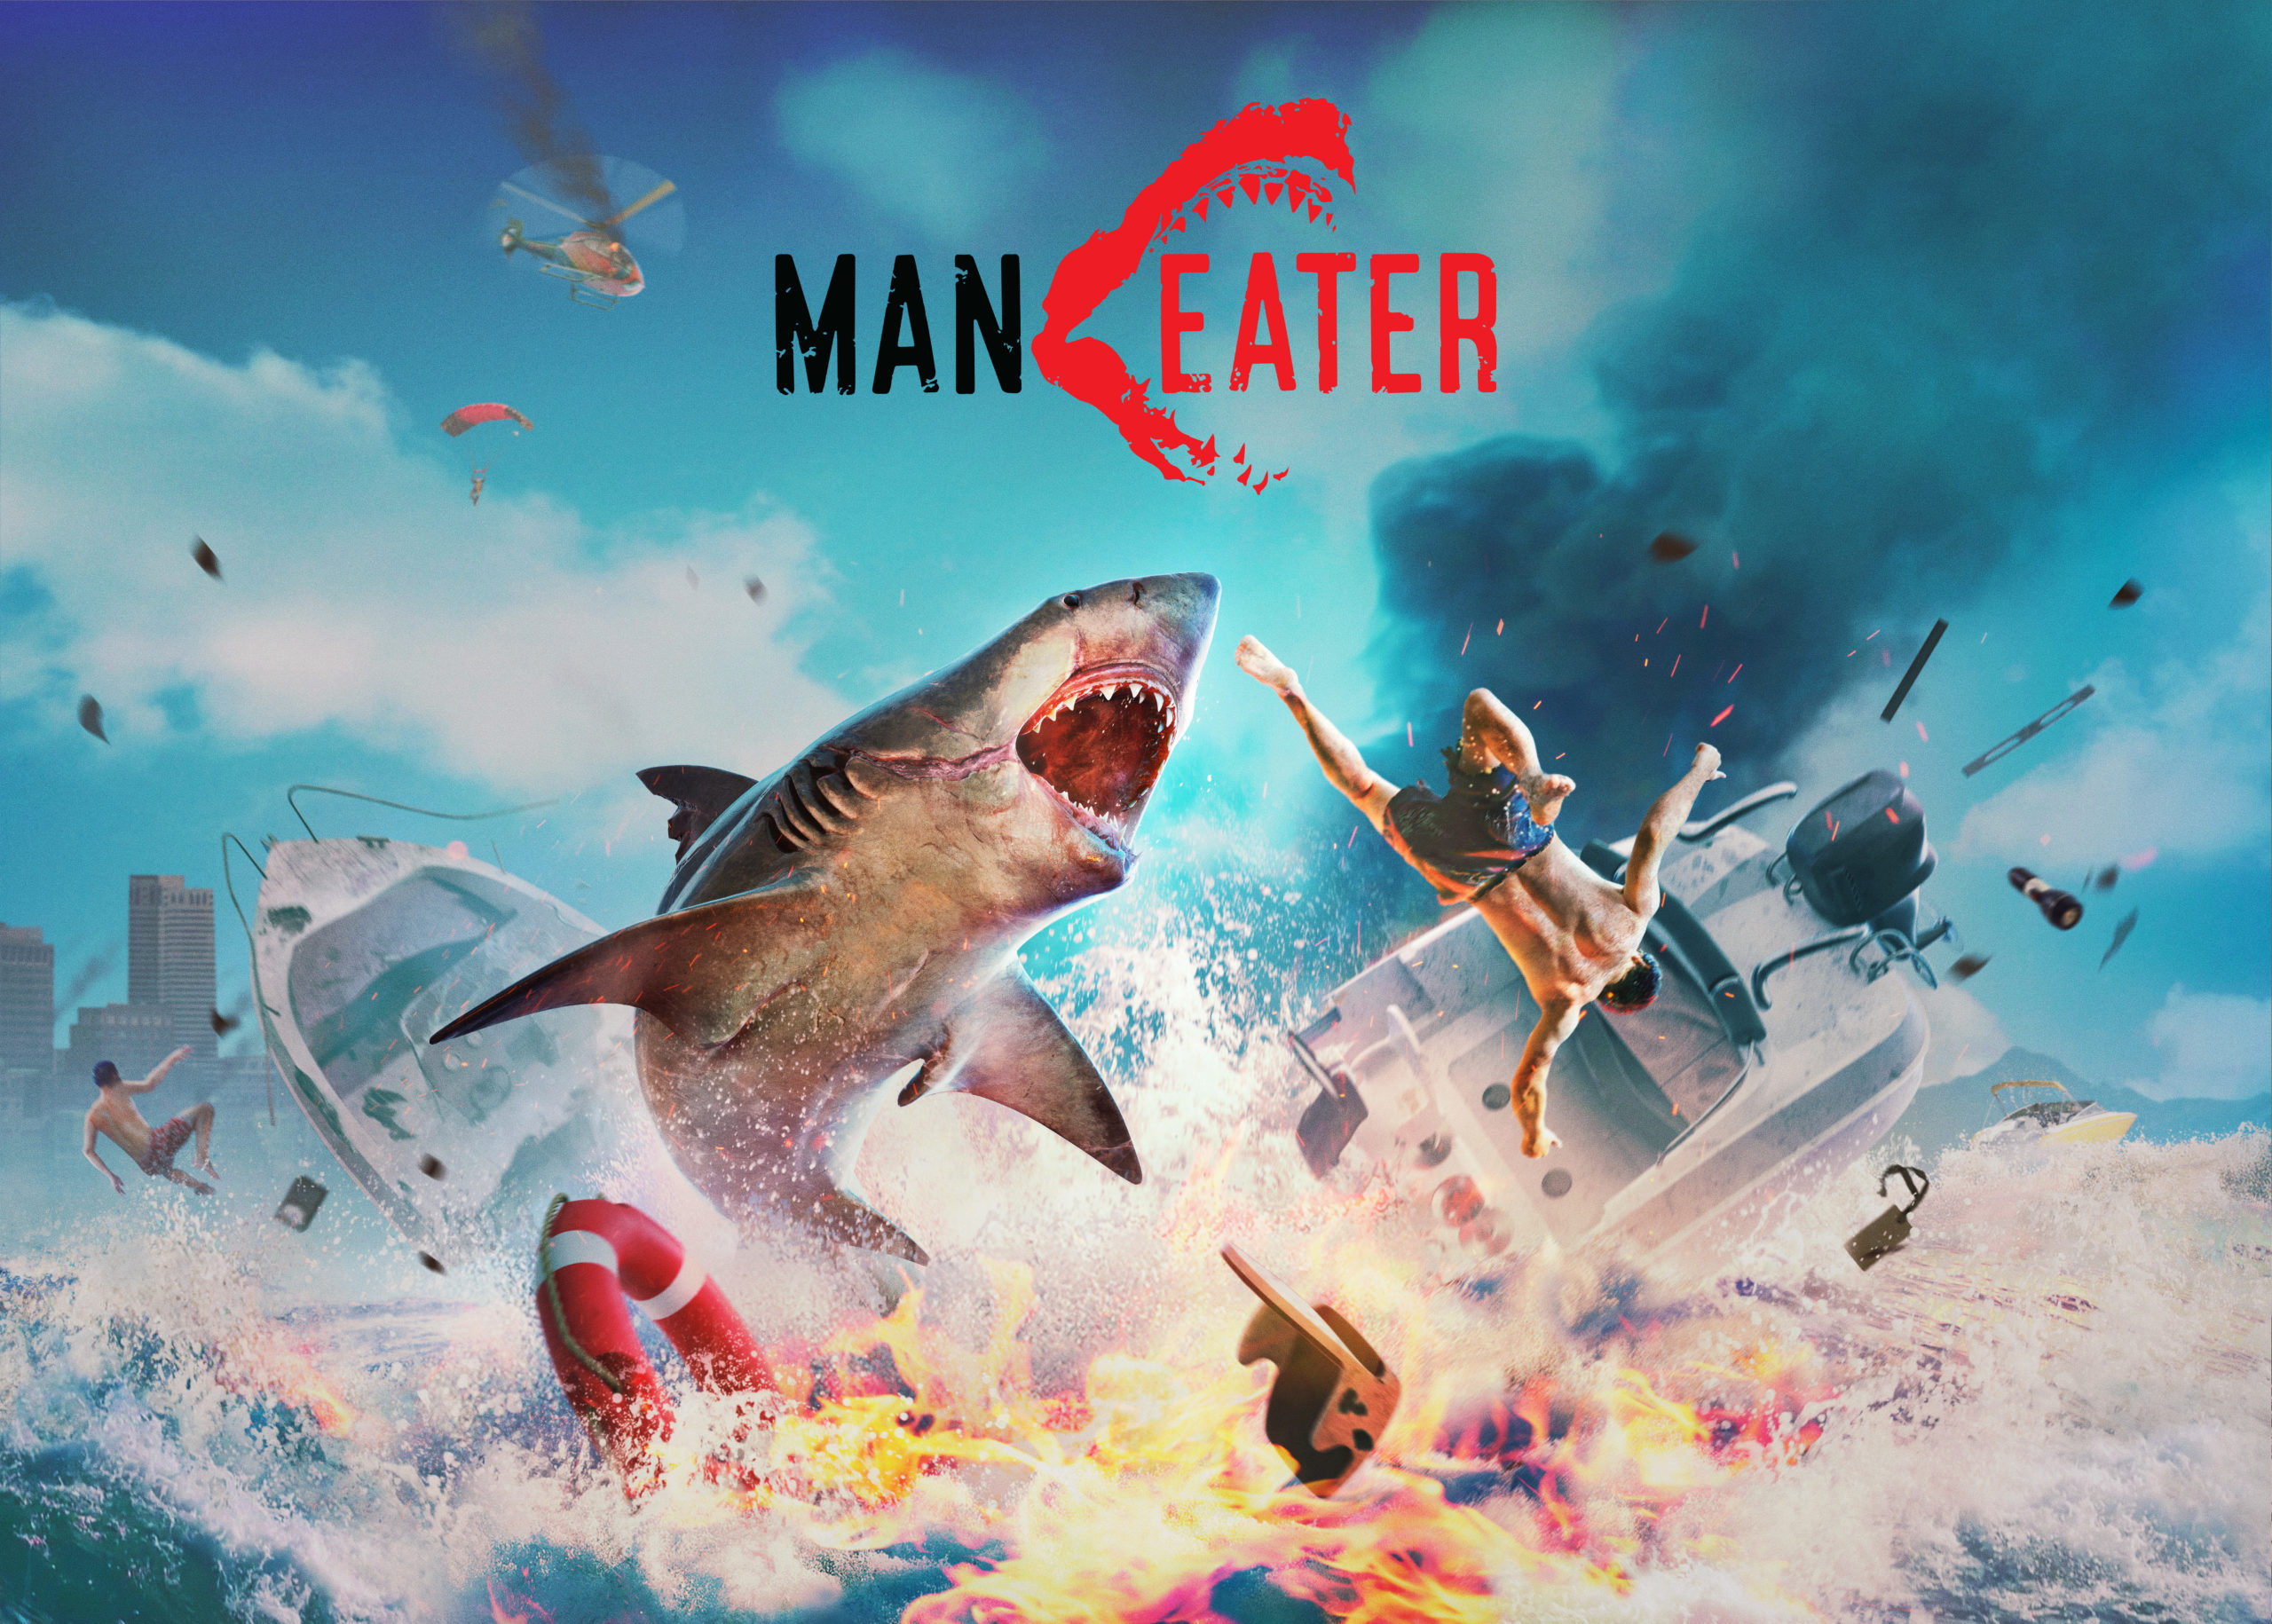 Maneater (Xbox One) Review – Watch Out Folks, She'll Chew You Up